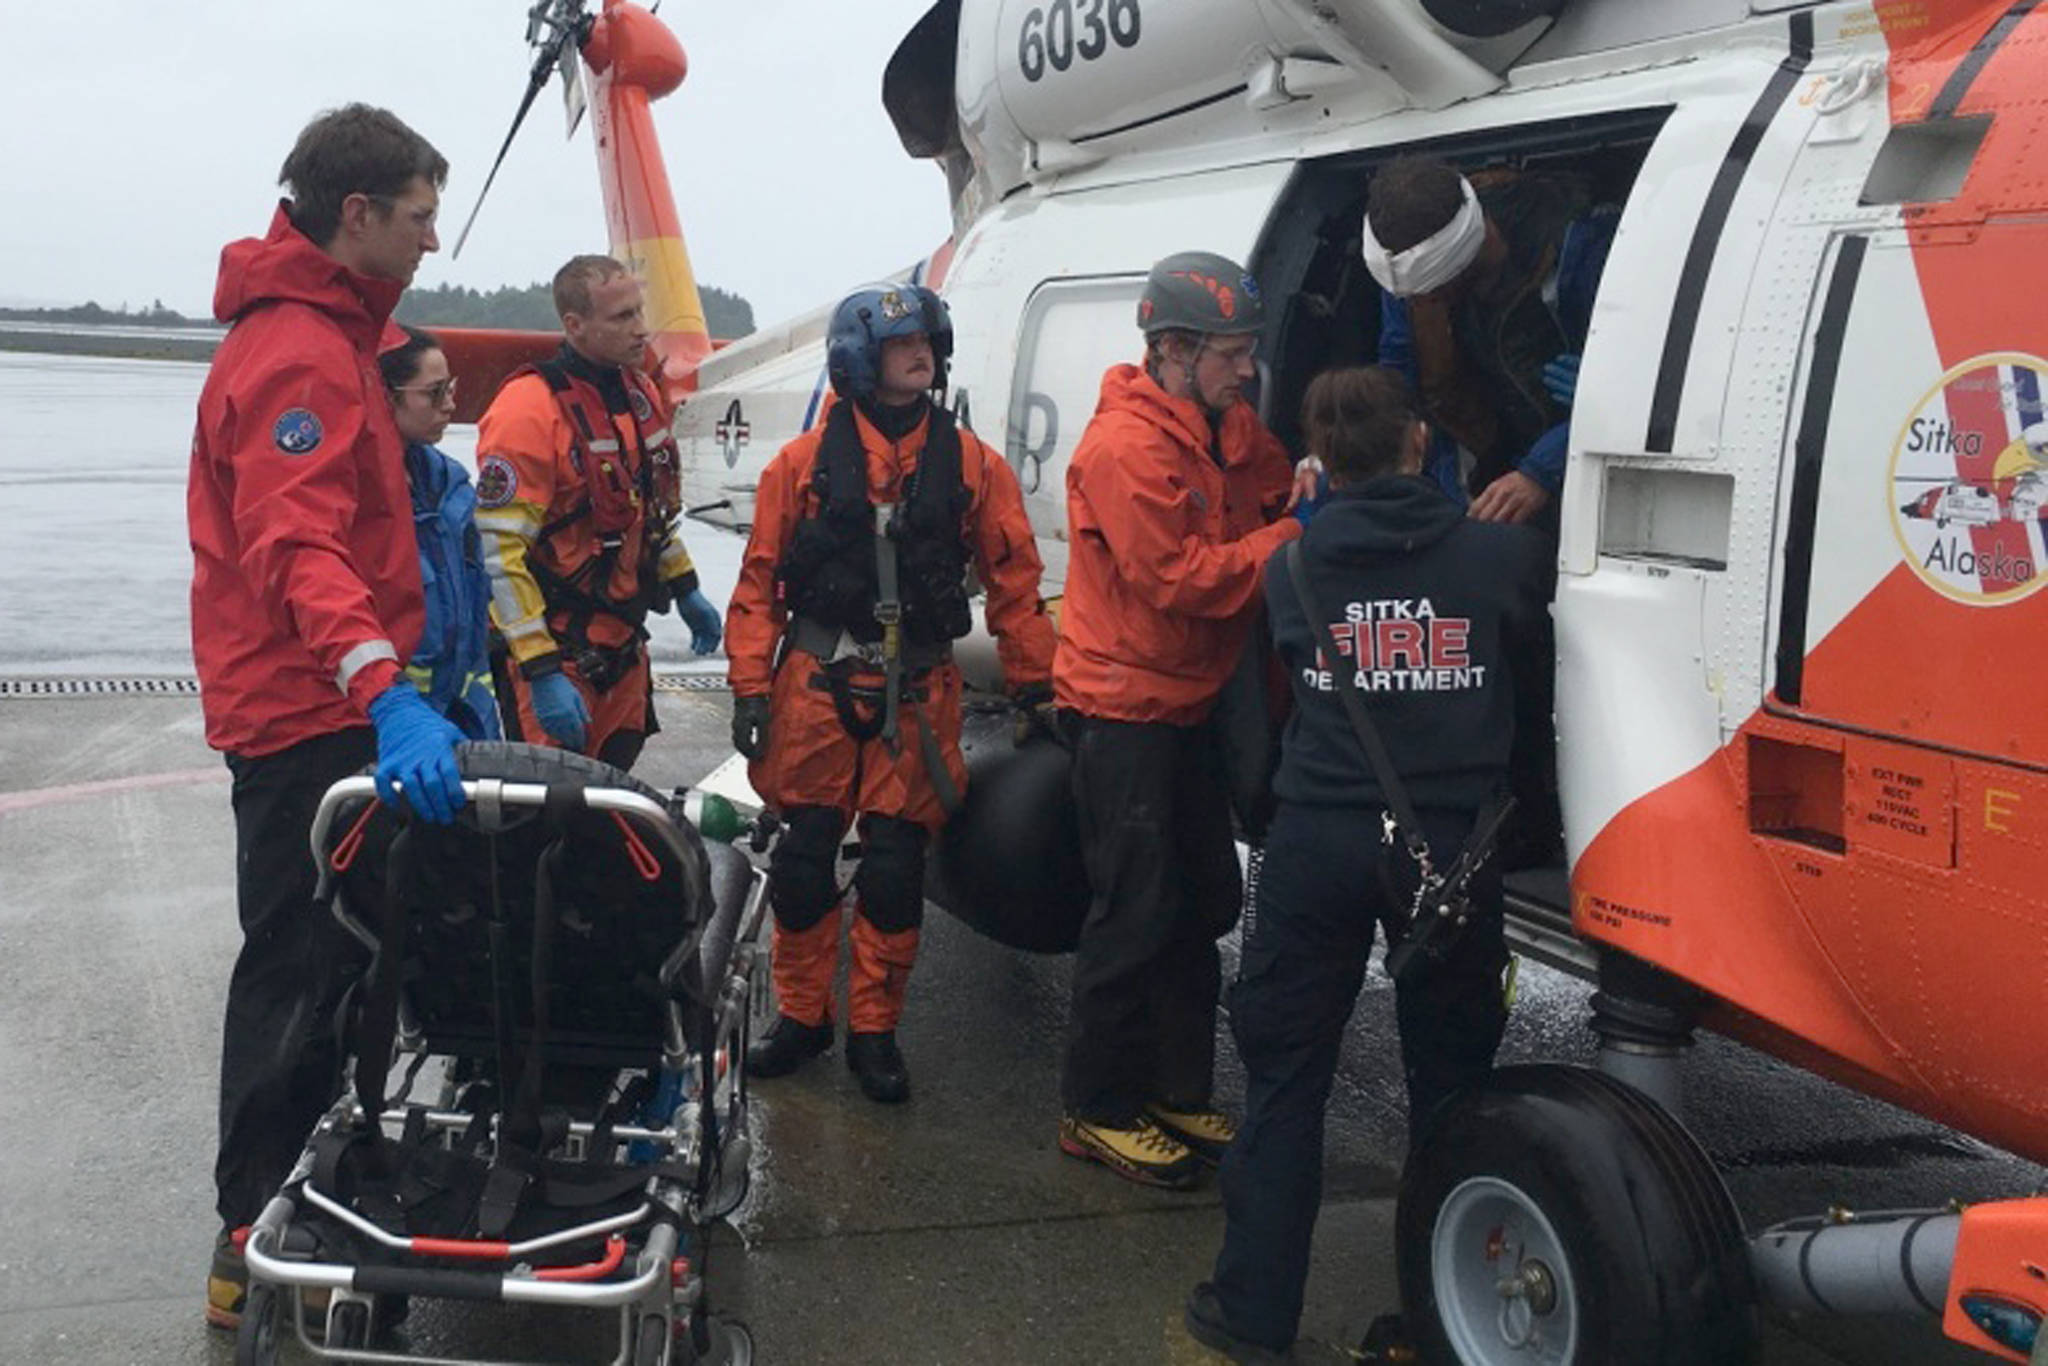 A Coast Guard Air Station Sitka MH-60 Jayhawk helicopter crew transfers an injured hiker to awaiting emergency medical services in Sitka, Alaska, June 15, 2019. The 55-year-old man required medical evacuation after reportedly falling 100 feet while hiking in the Sisters Mountains with two other people. (Courtesy photo | U.S. Coast Guard)